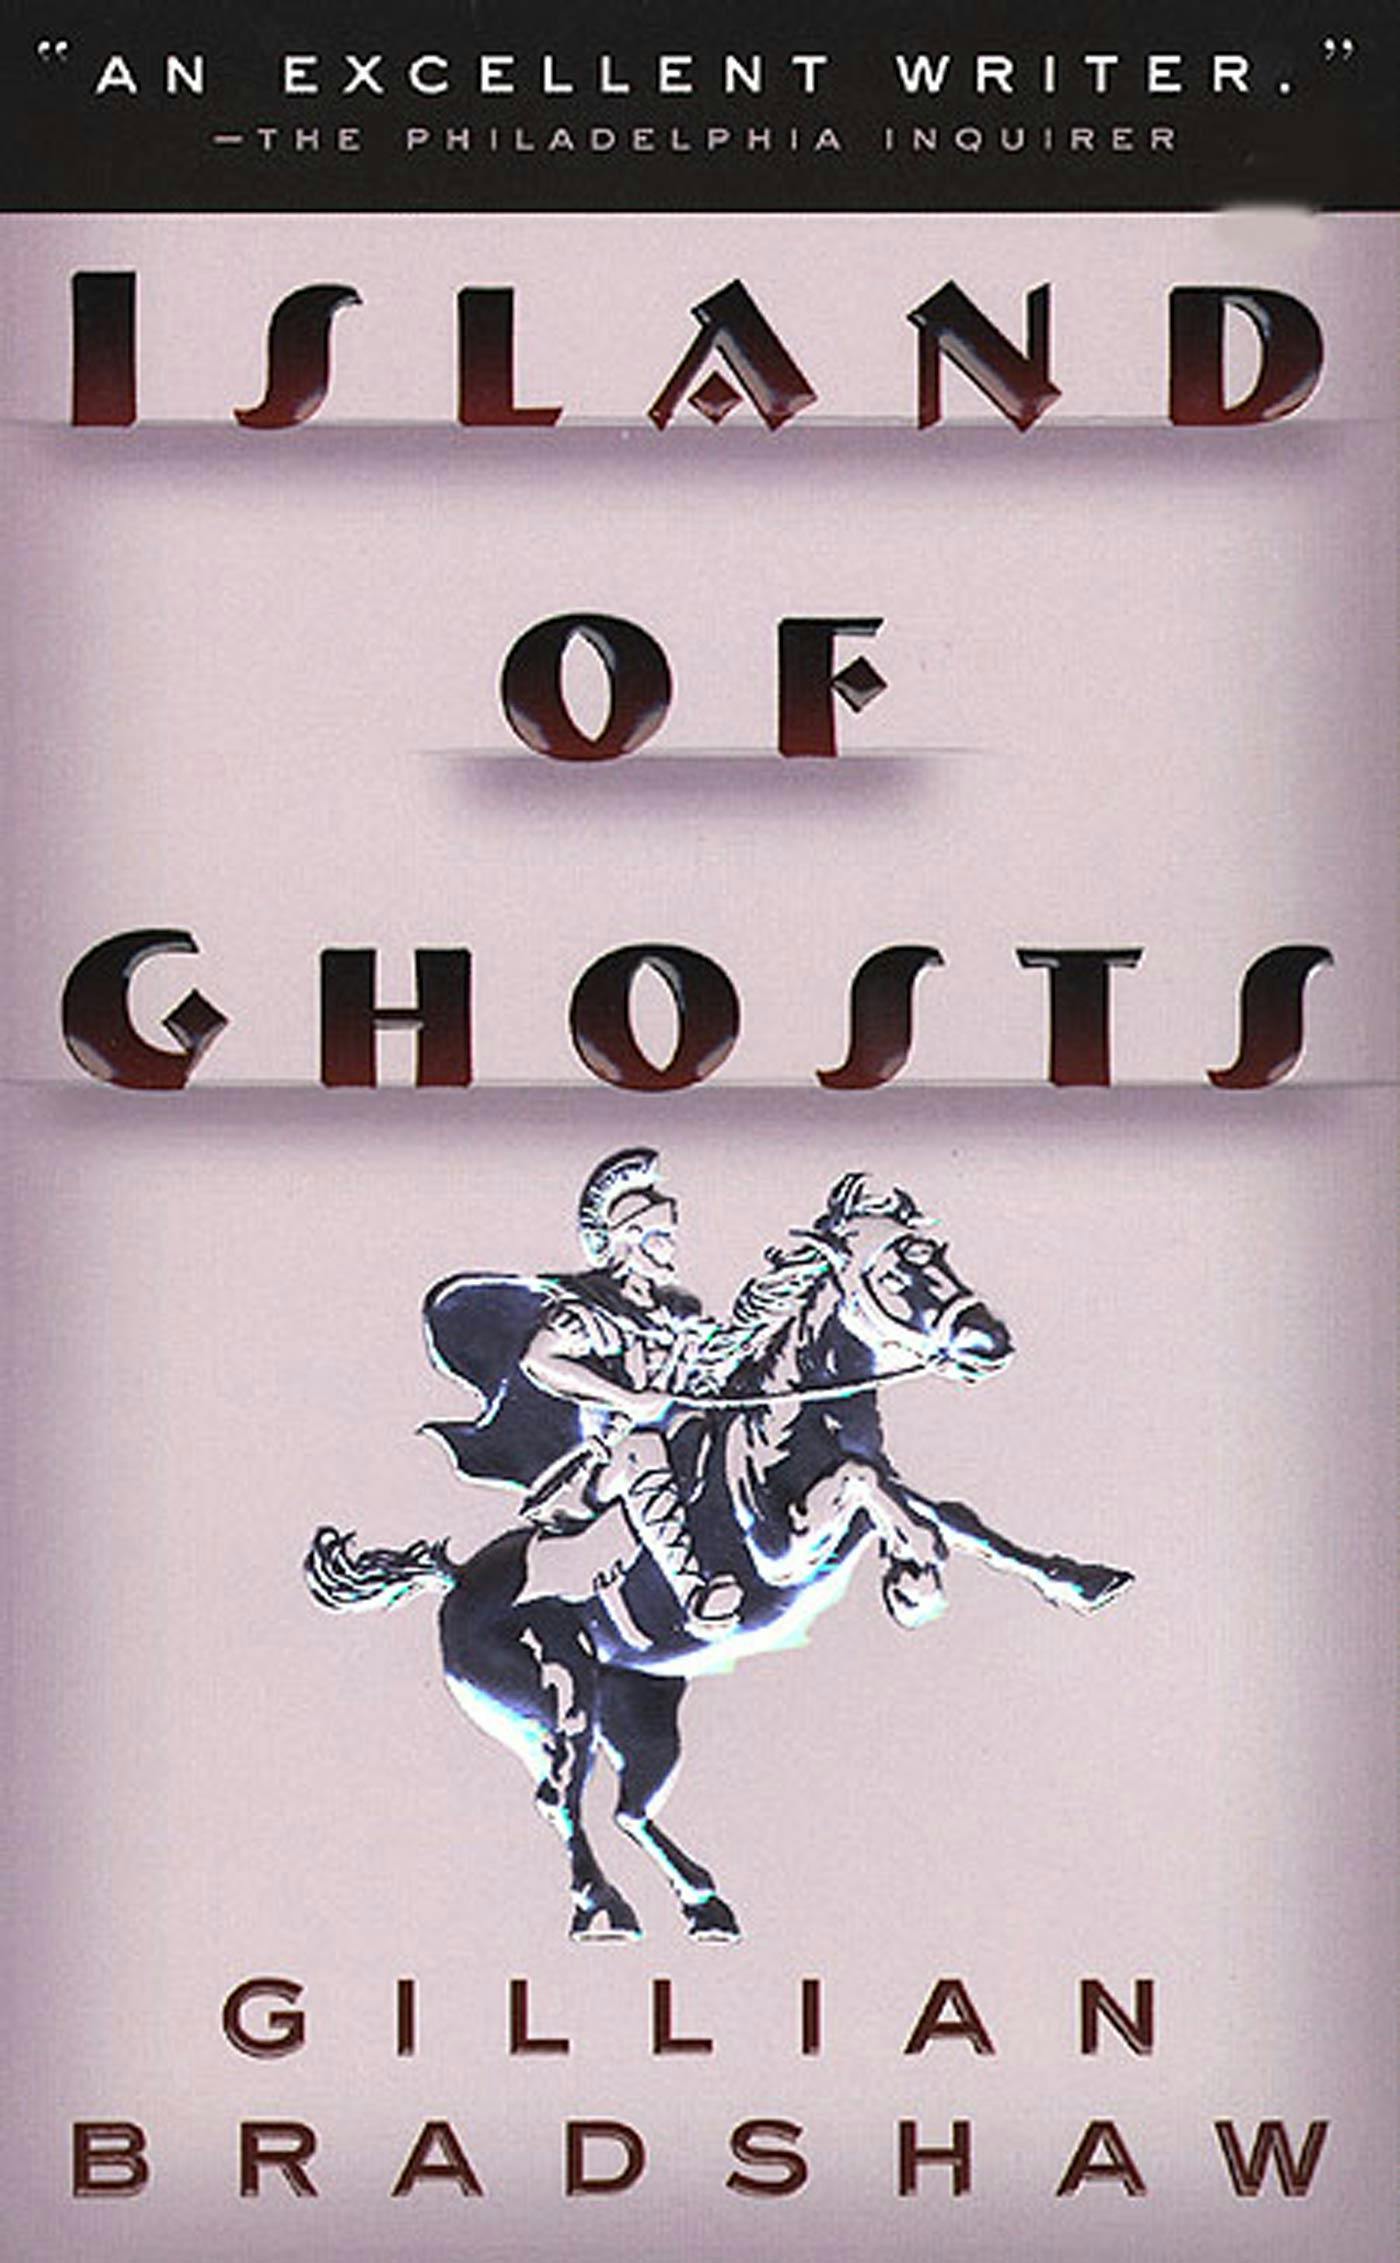 Cover for the book titled as: Island of Ghosts